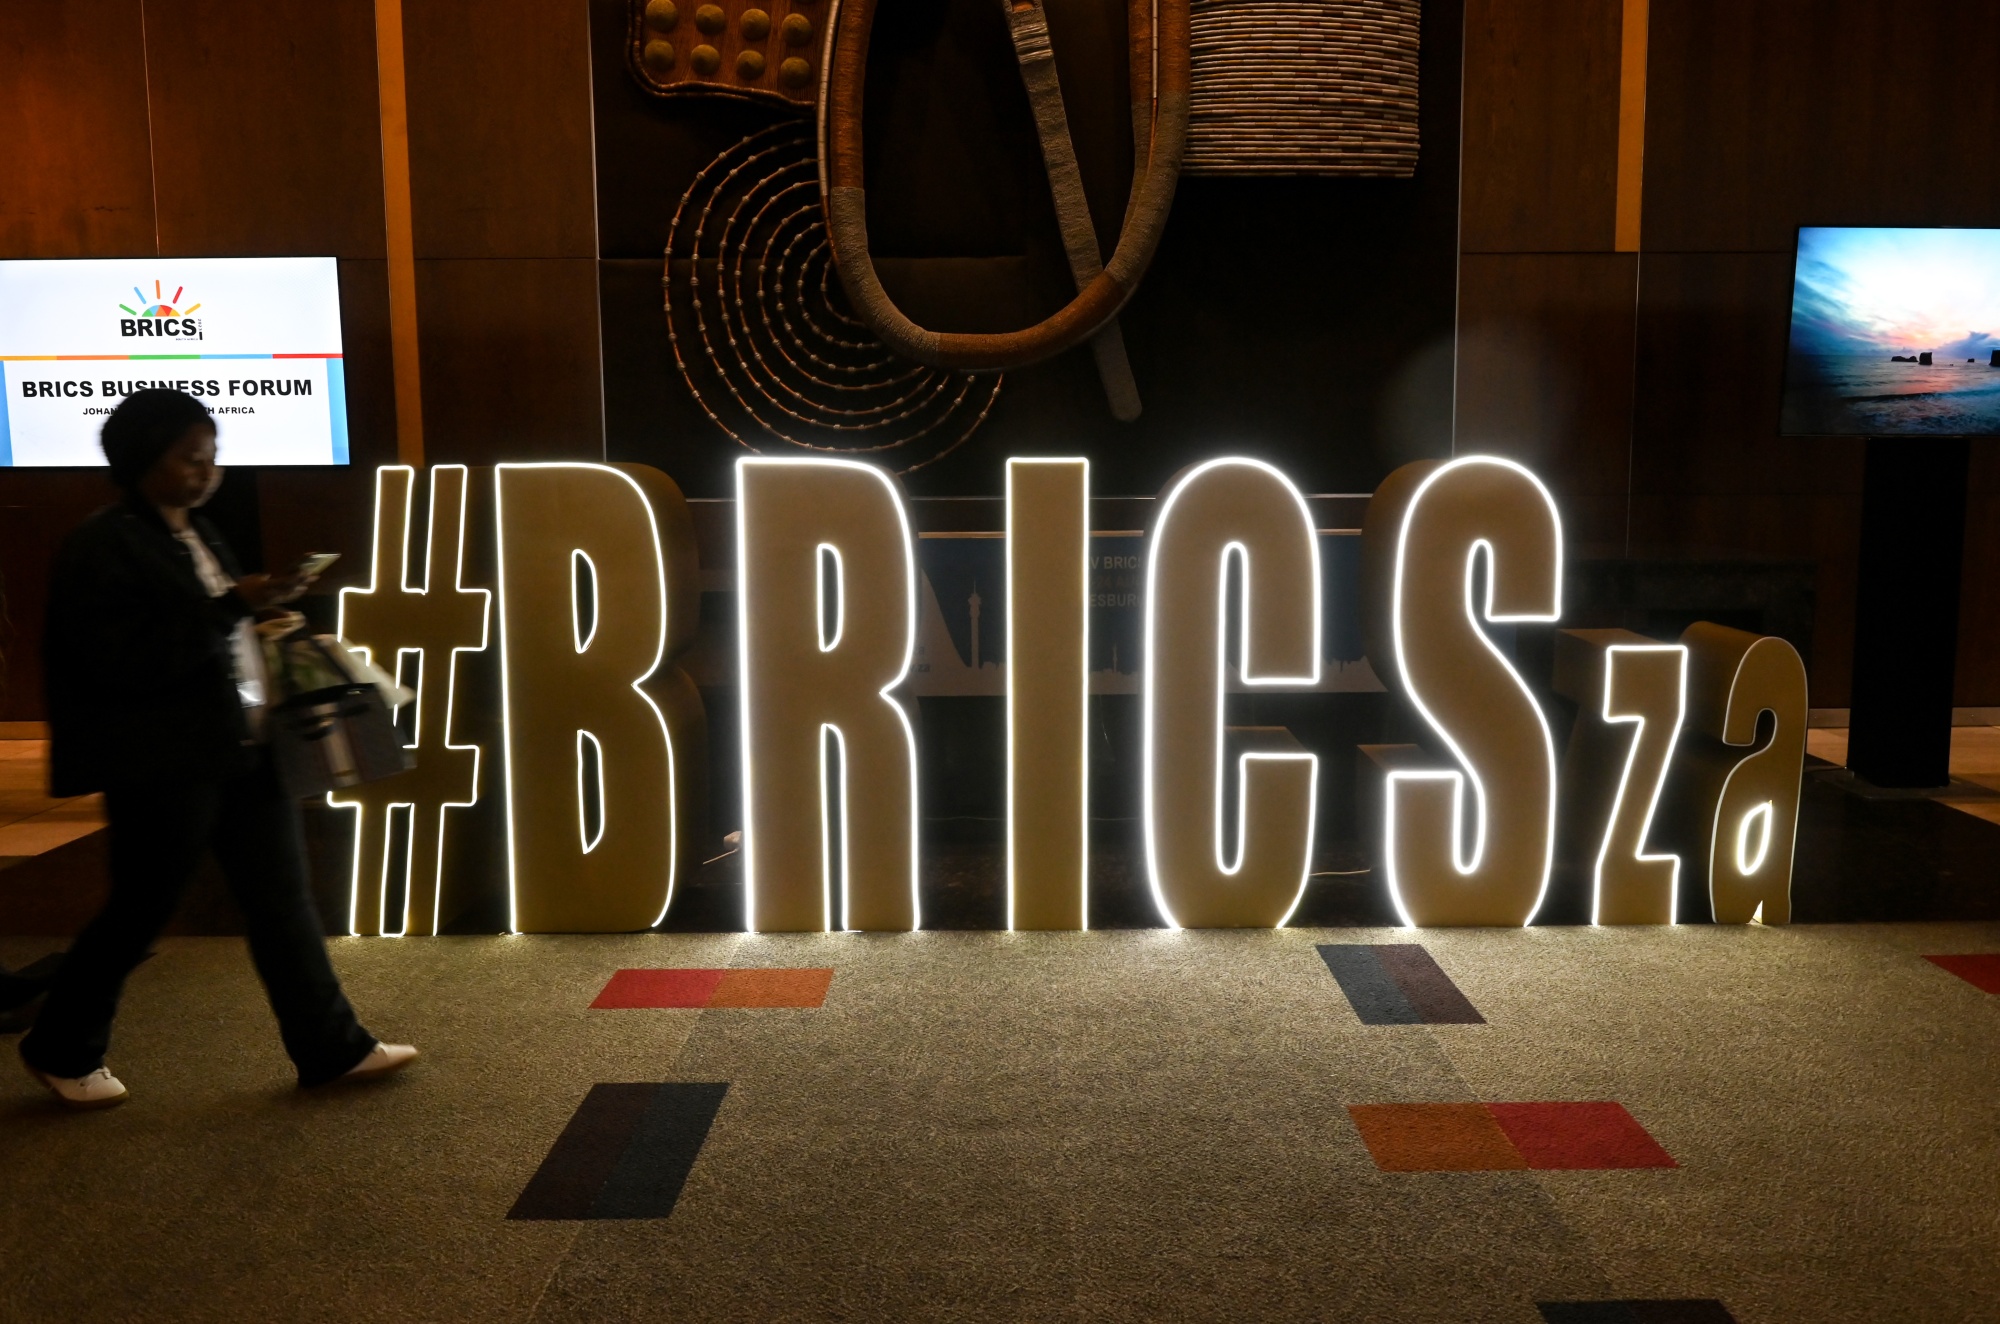 A visitor passes an illuminated sign at&nbsp;the BRICS summit in Johannesburg, South Africa.